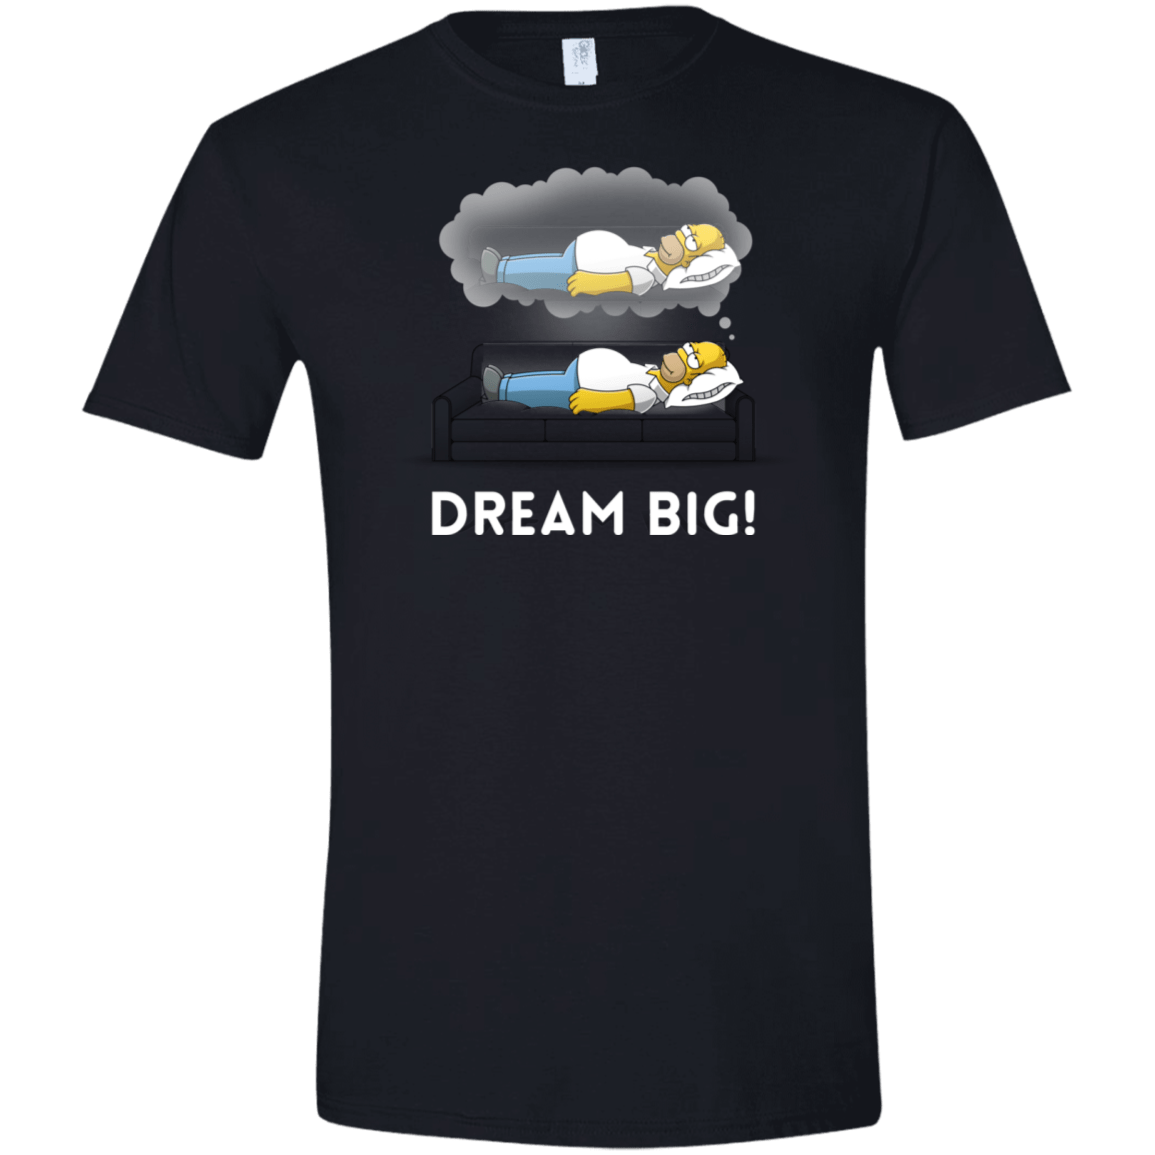 T-Shirts Black / X-Small Dream Big! Men's Semi-Fitted Softstyle